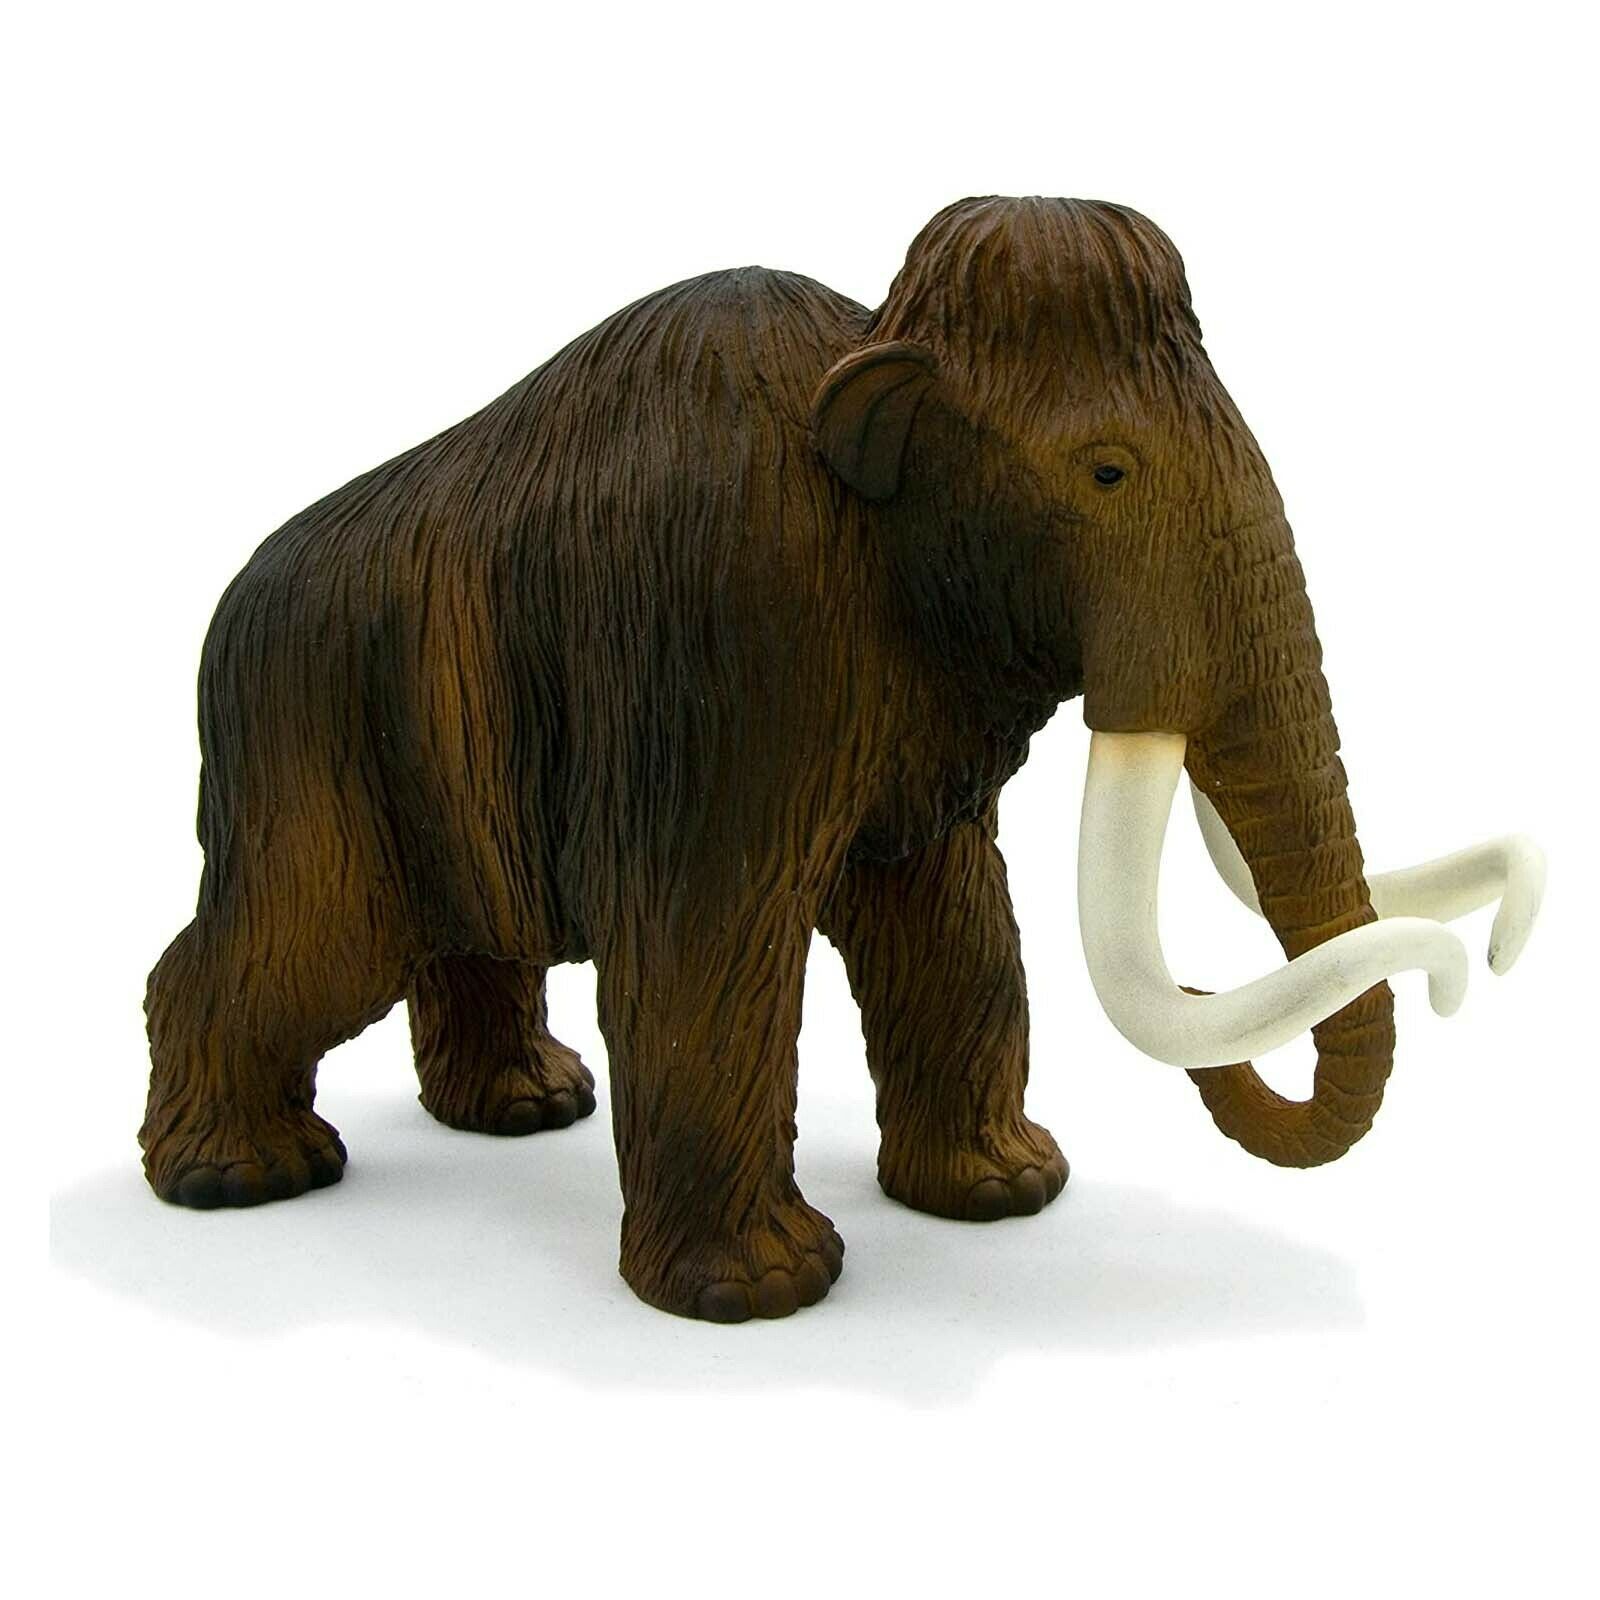 Mojo Wooly Mammoth Prehistoric Animal Figure 387049 New Educational Learning